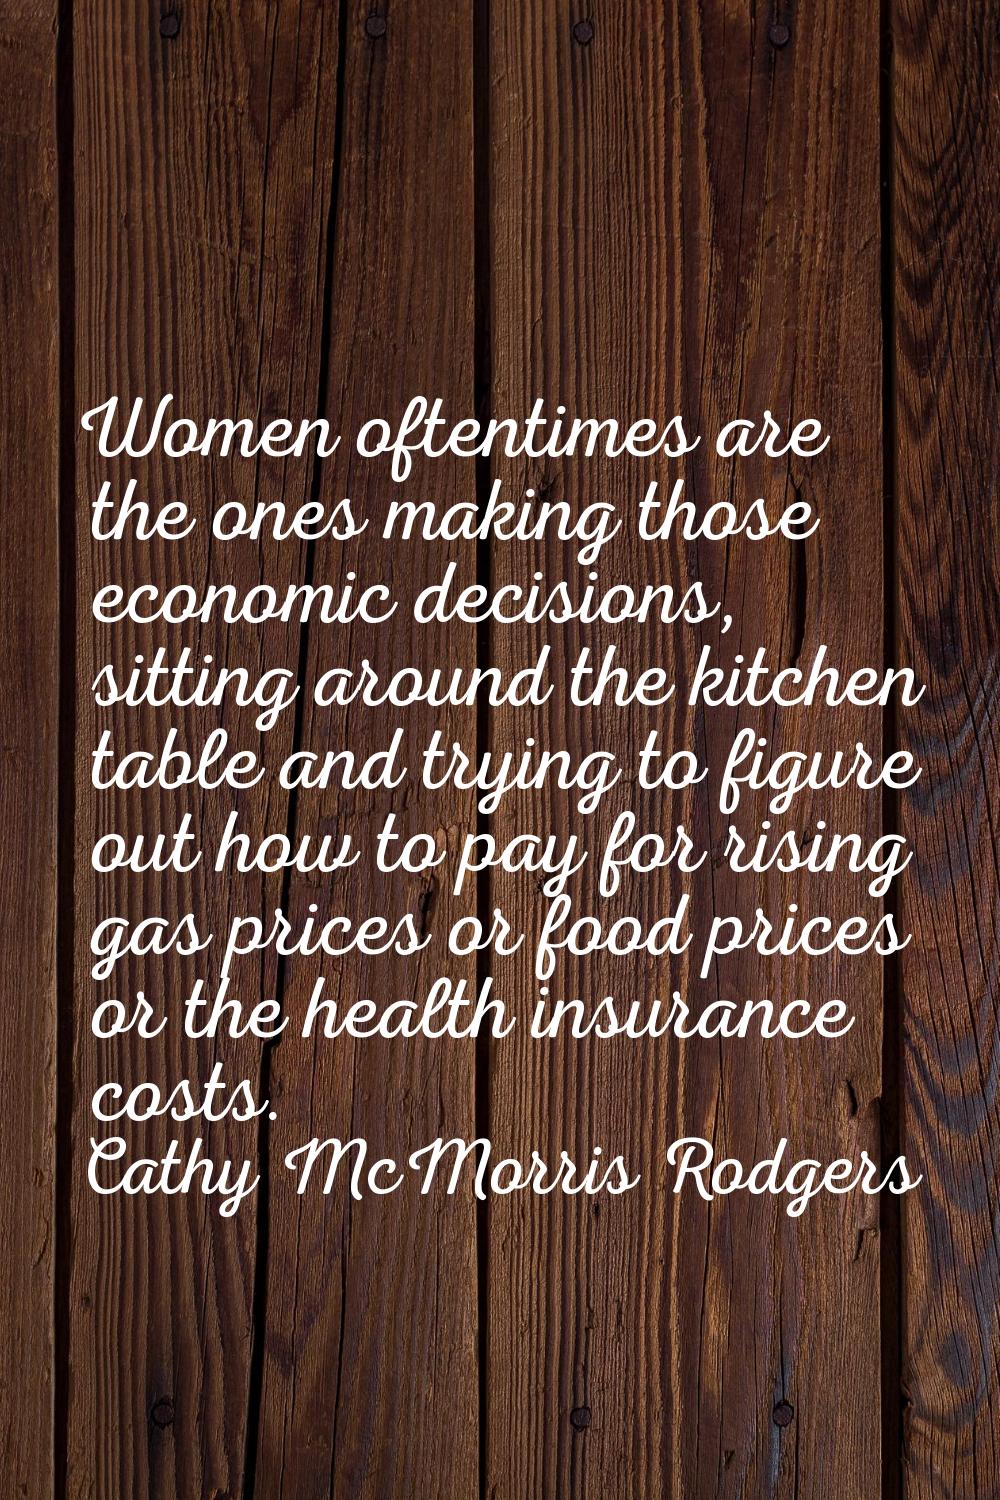 Women oftentimes are the ones making those economic decisions, sitting around the kitchen table and